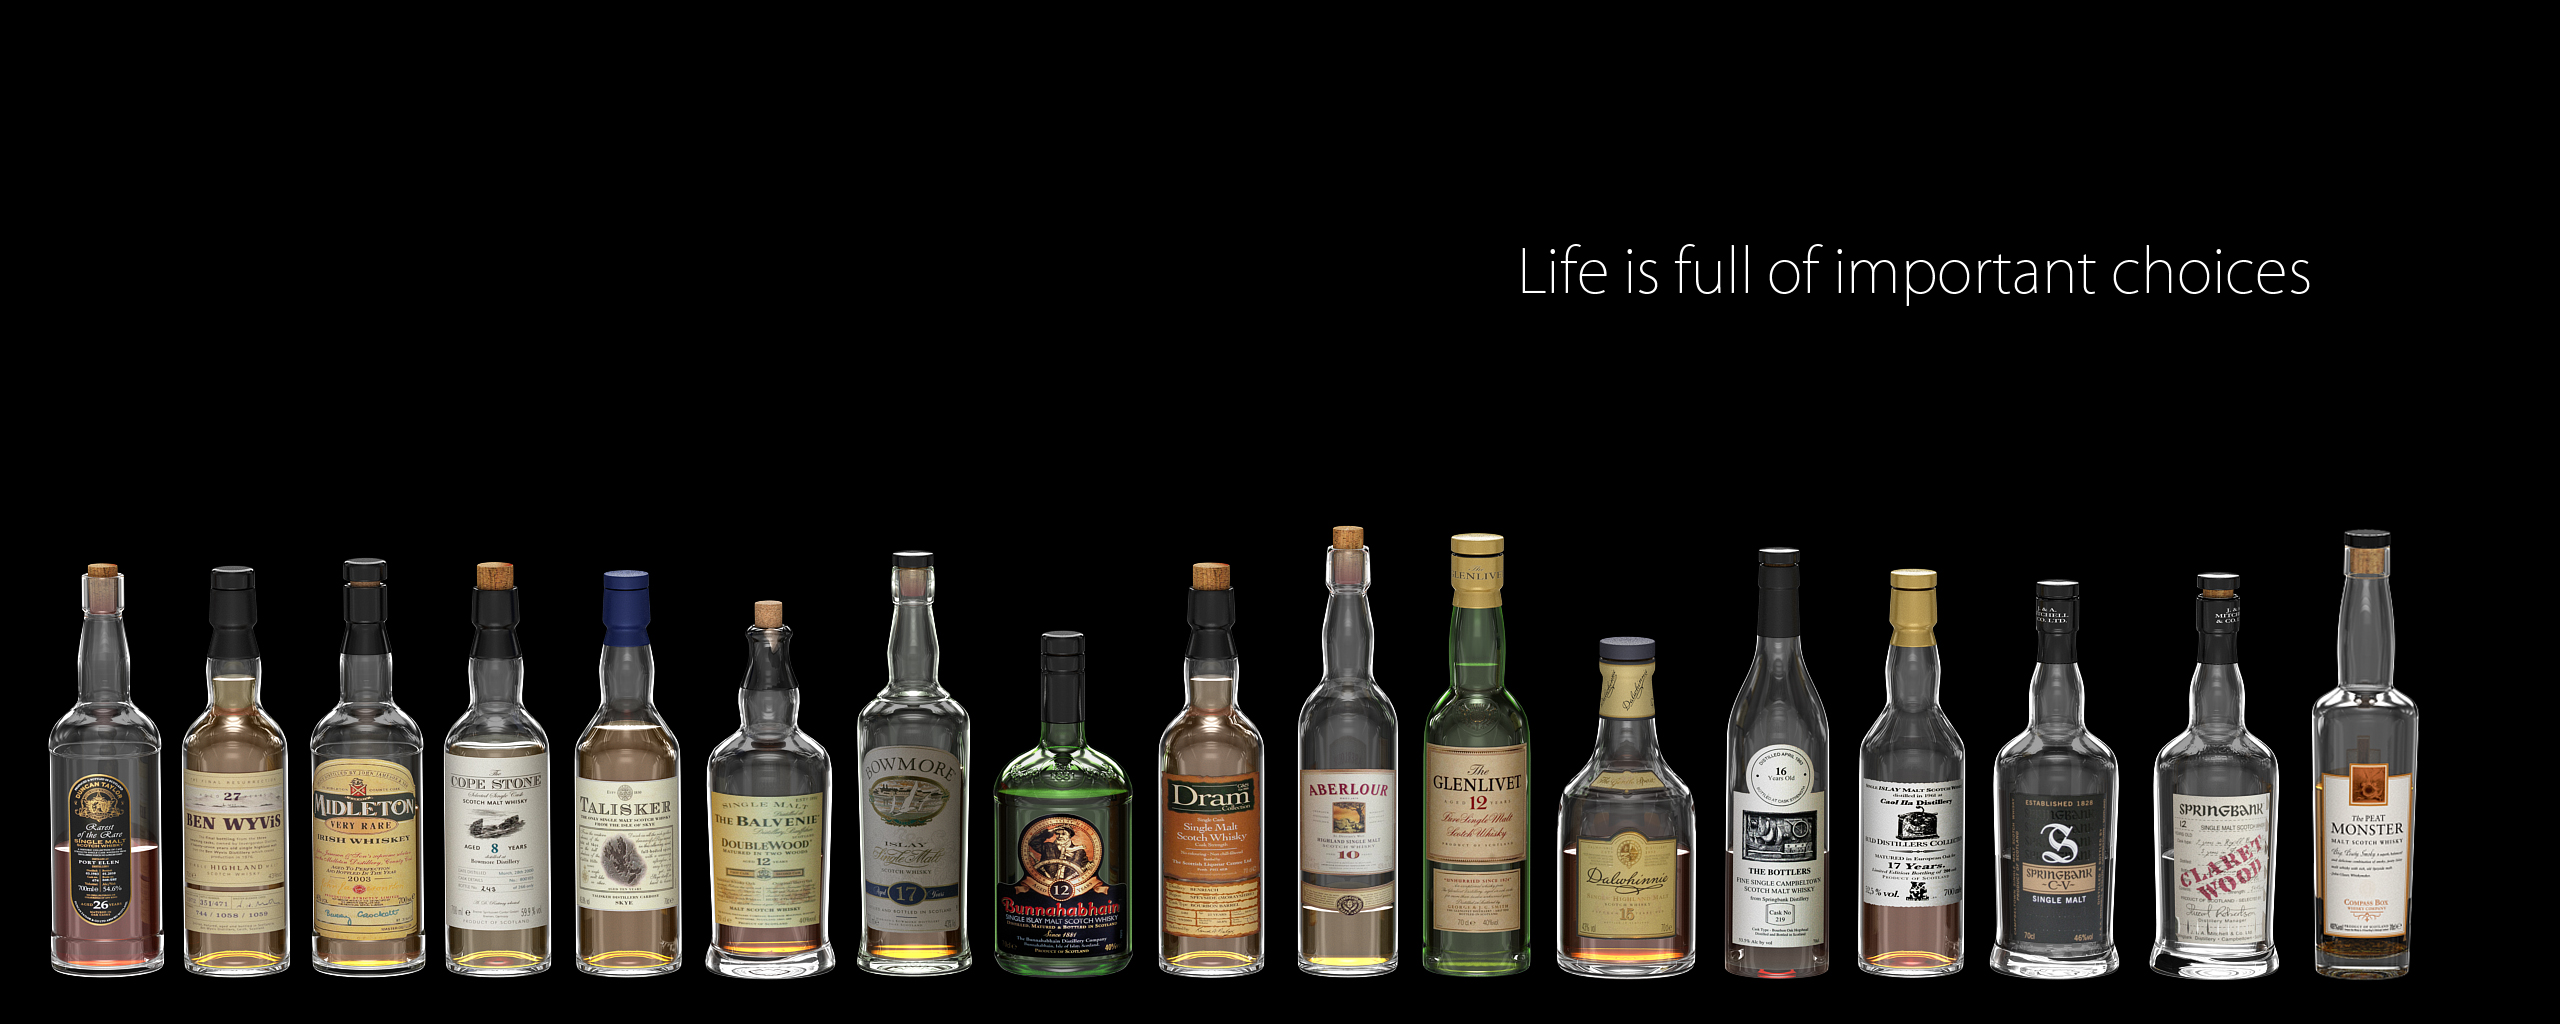 Whisky Wallpaper HD Quality Image